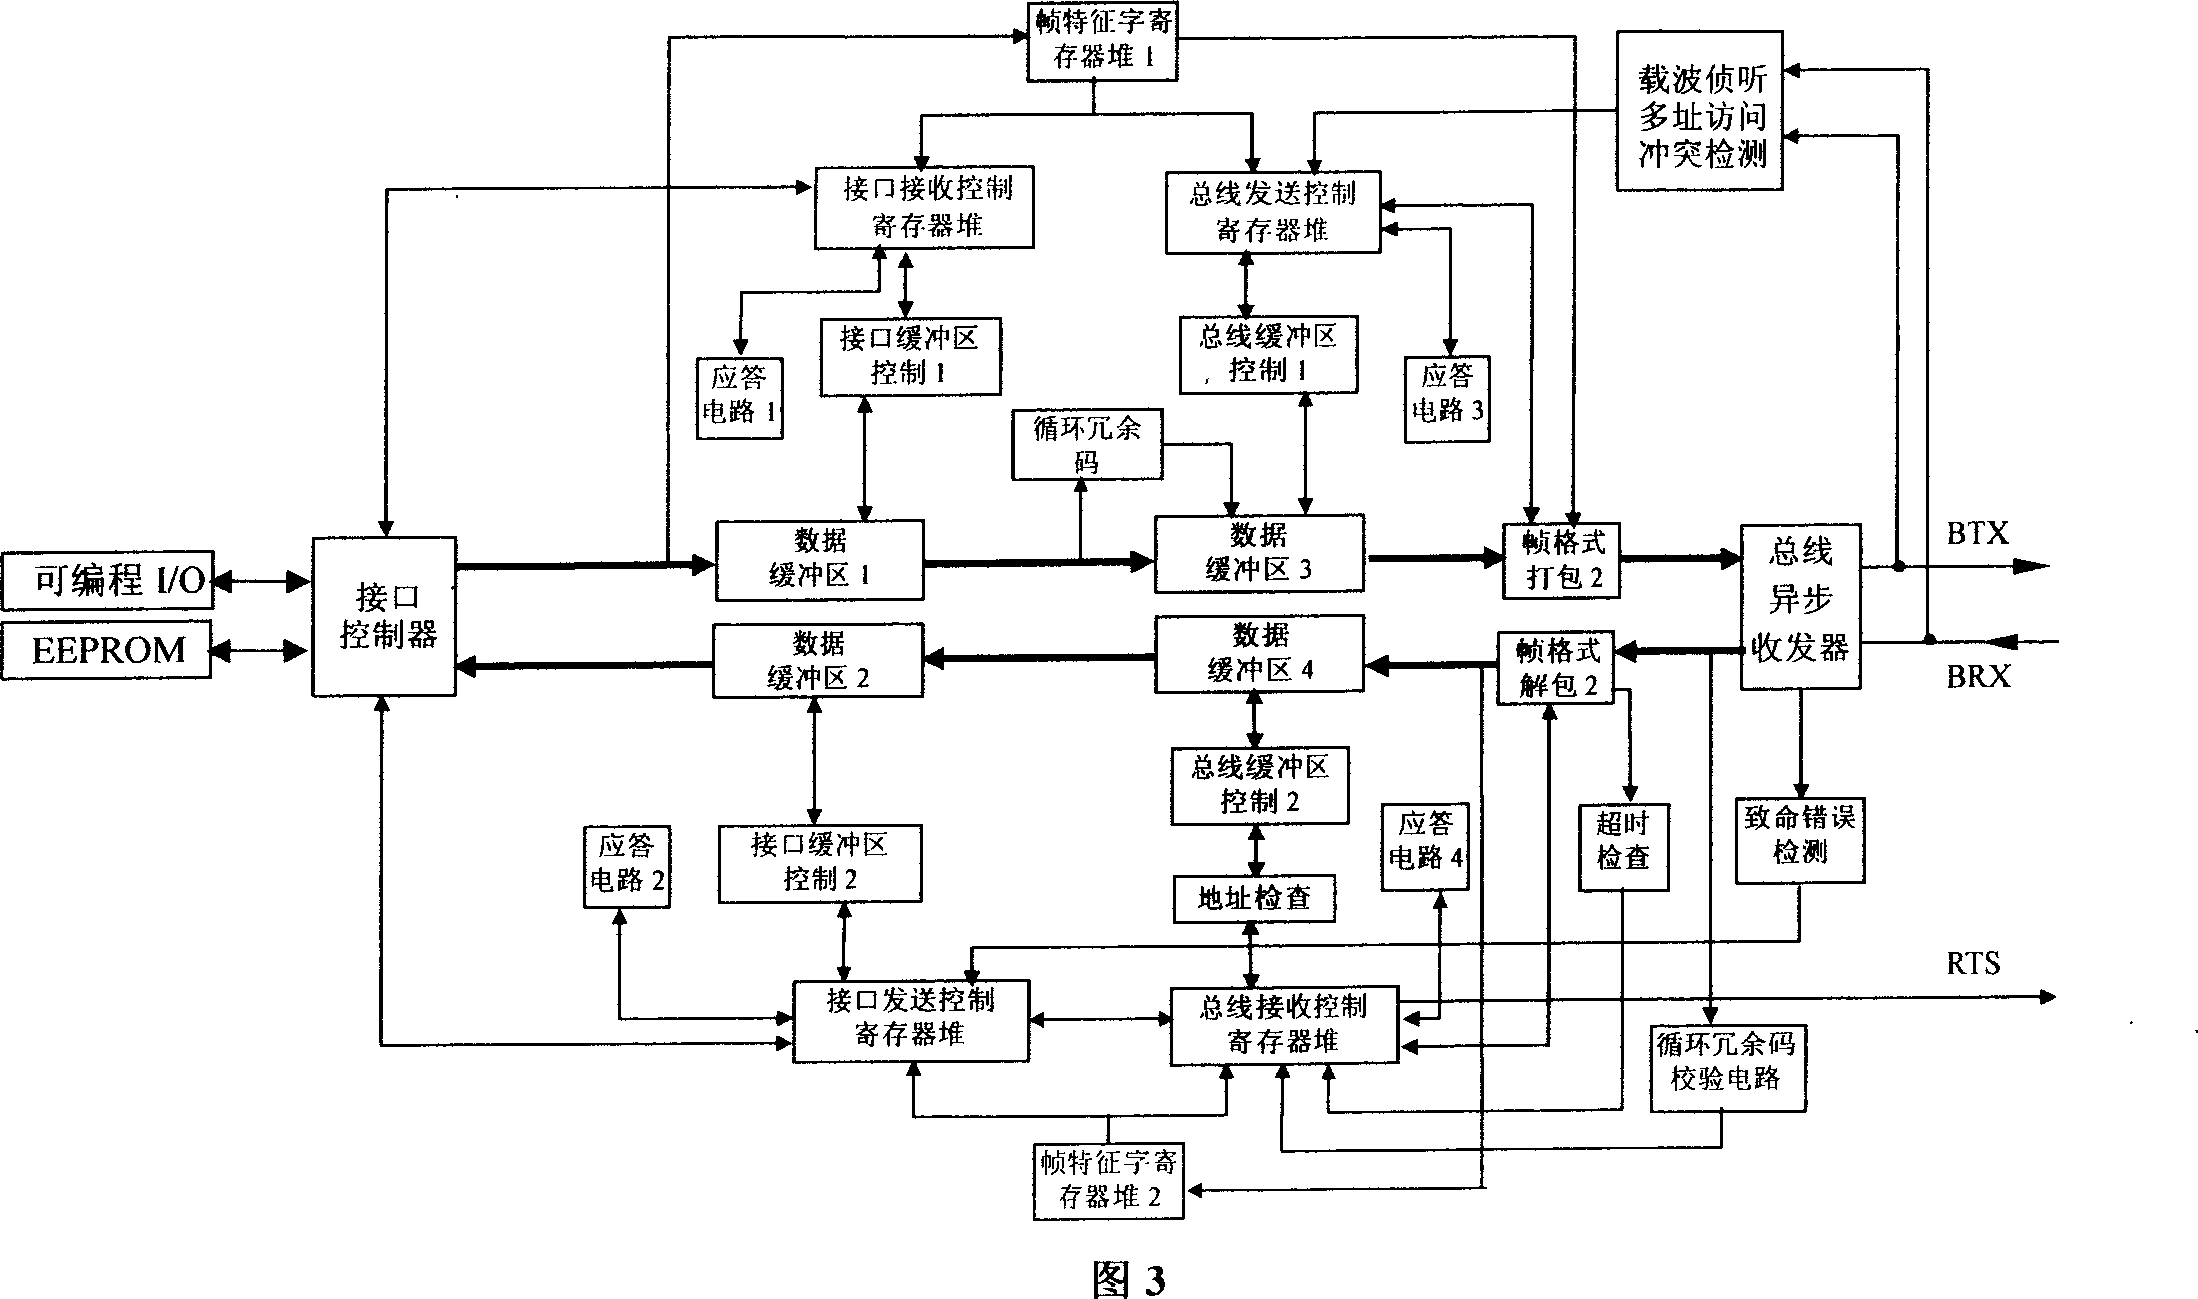 A readable-writable and programmable I/O interface controller/communication controller